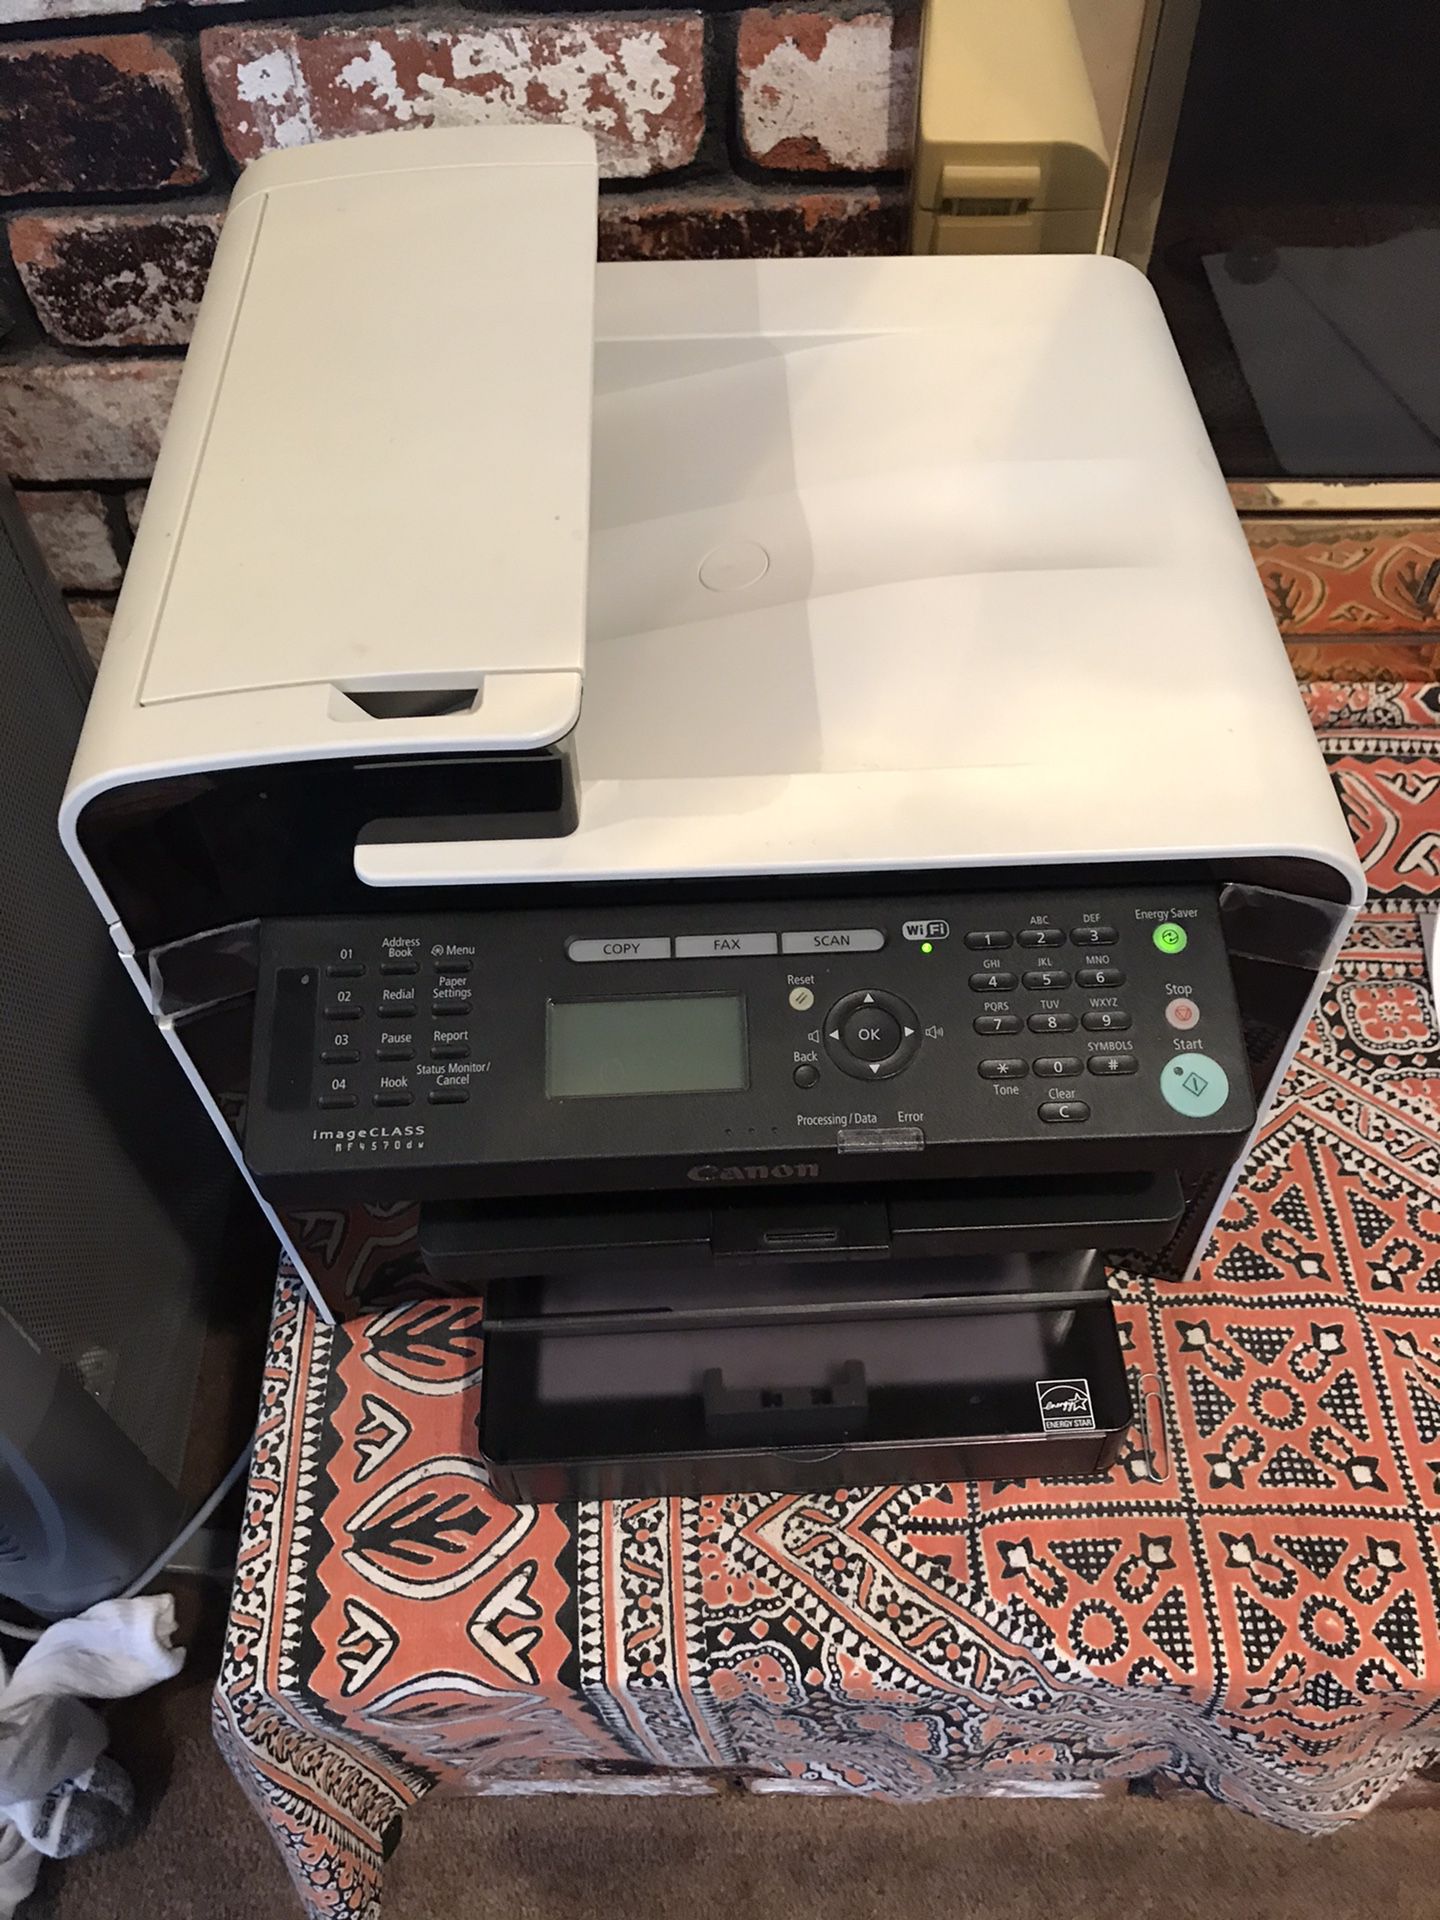 Canon image class laser printer, scanner and fax - MF4570dw